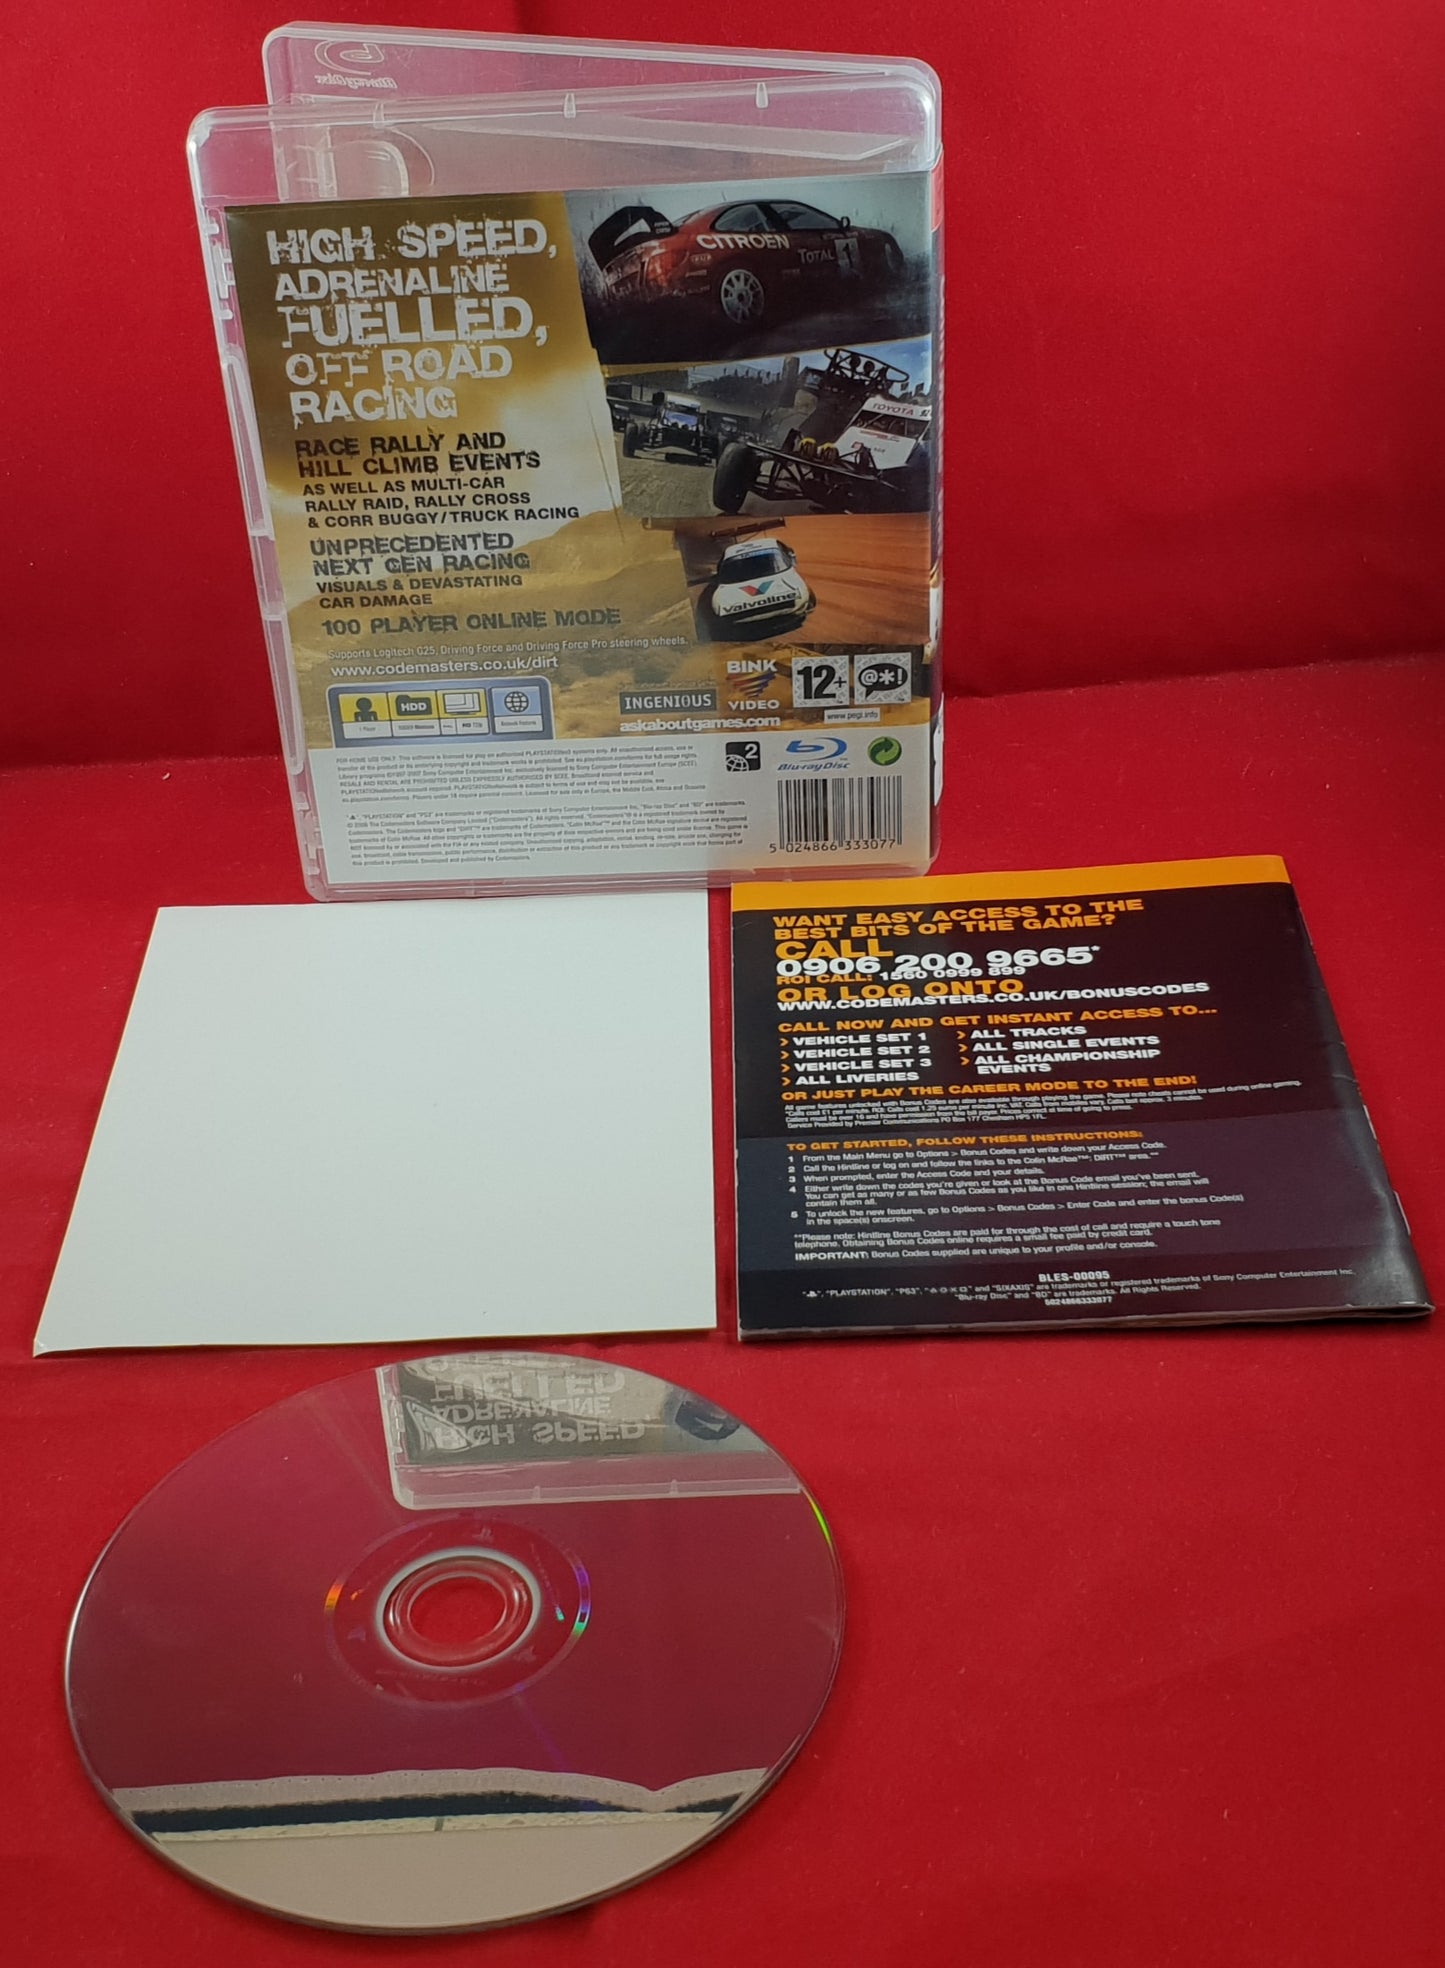 Colin McRae Dirt Sony Playstation 3 (PS3) Game